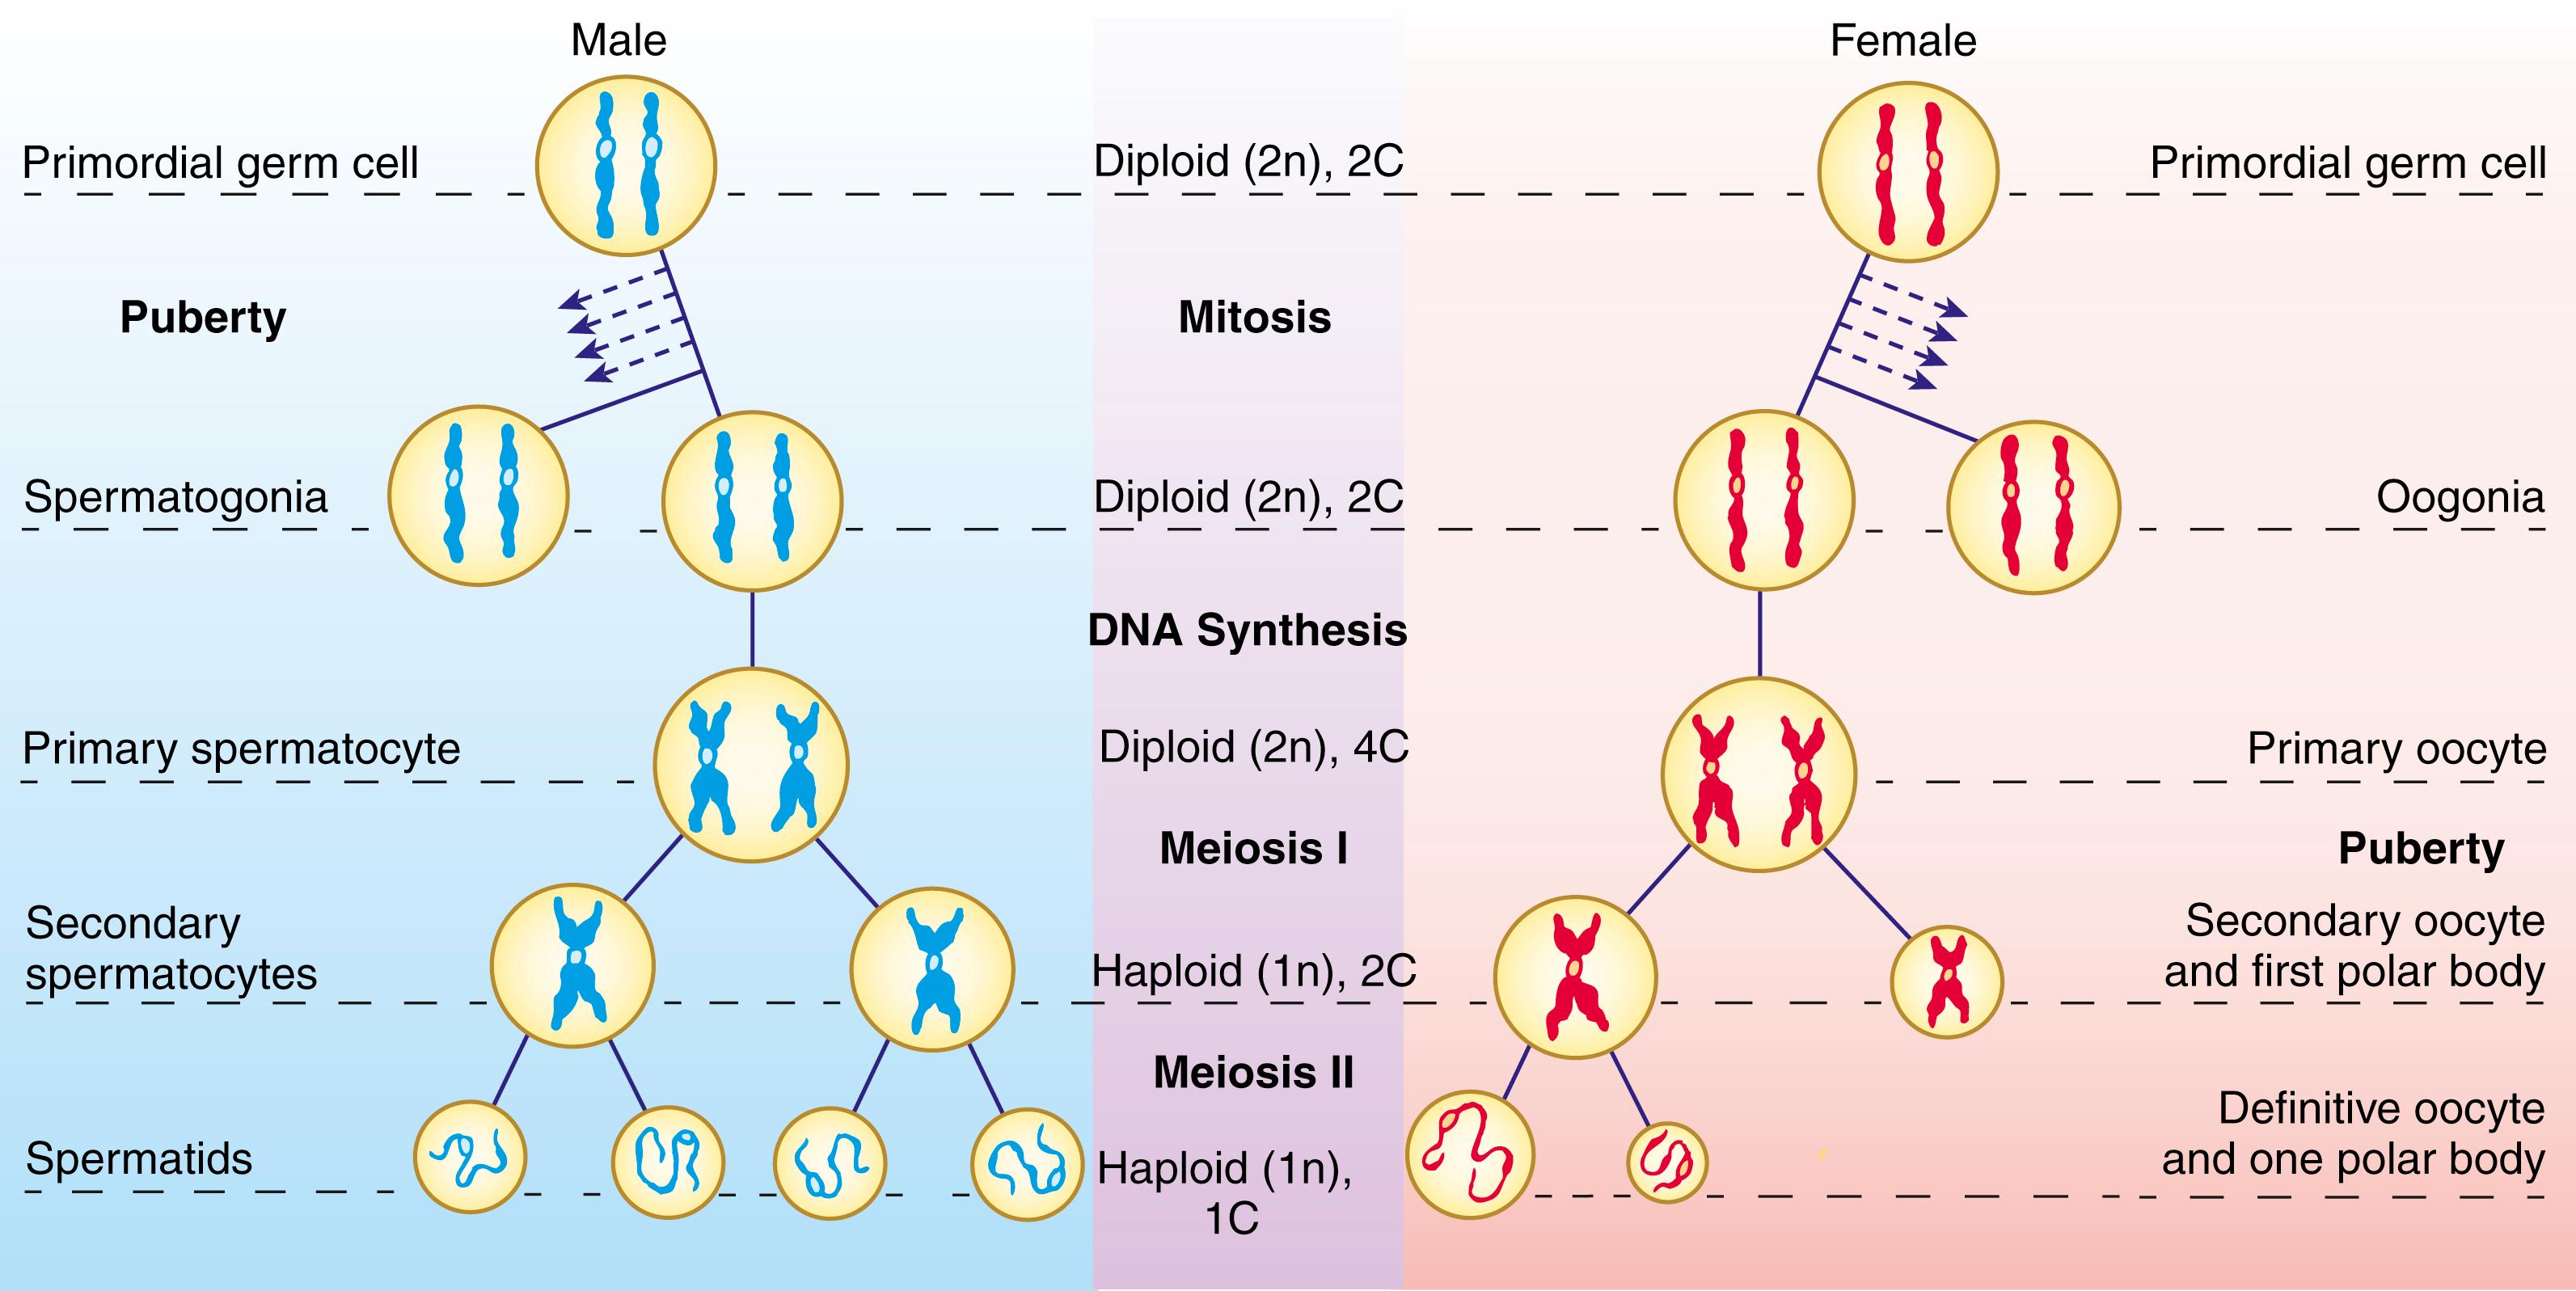 Fig. 1.3, Nuclear Maturation of Germ Cells in Meiosis in the Male and Female